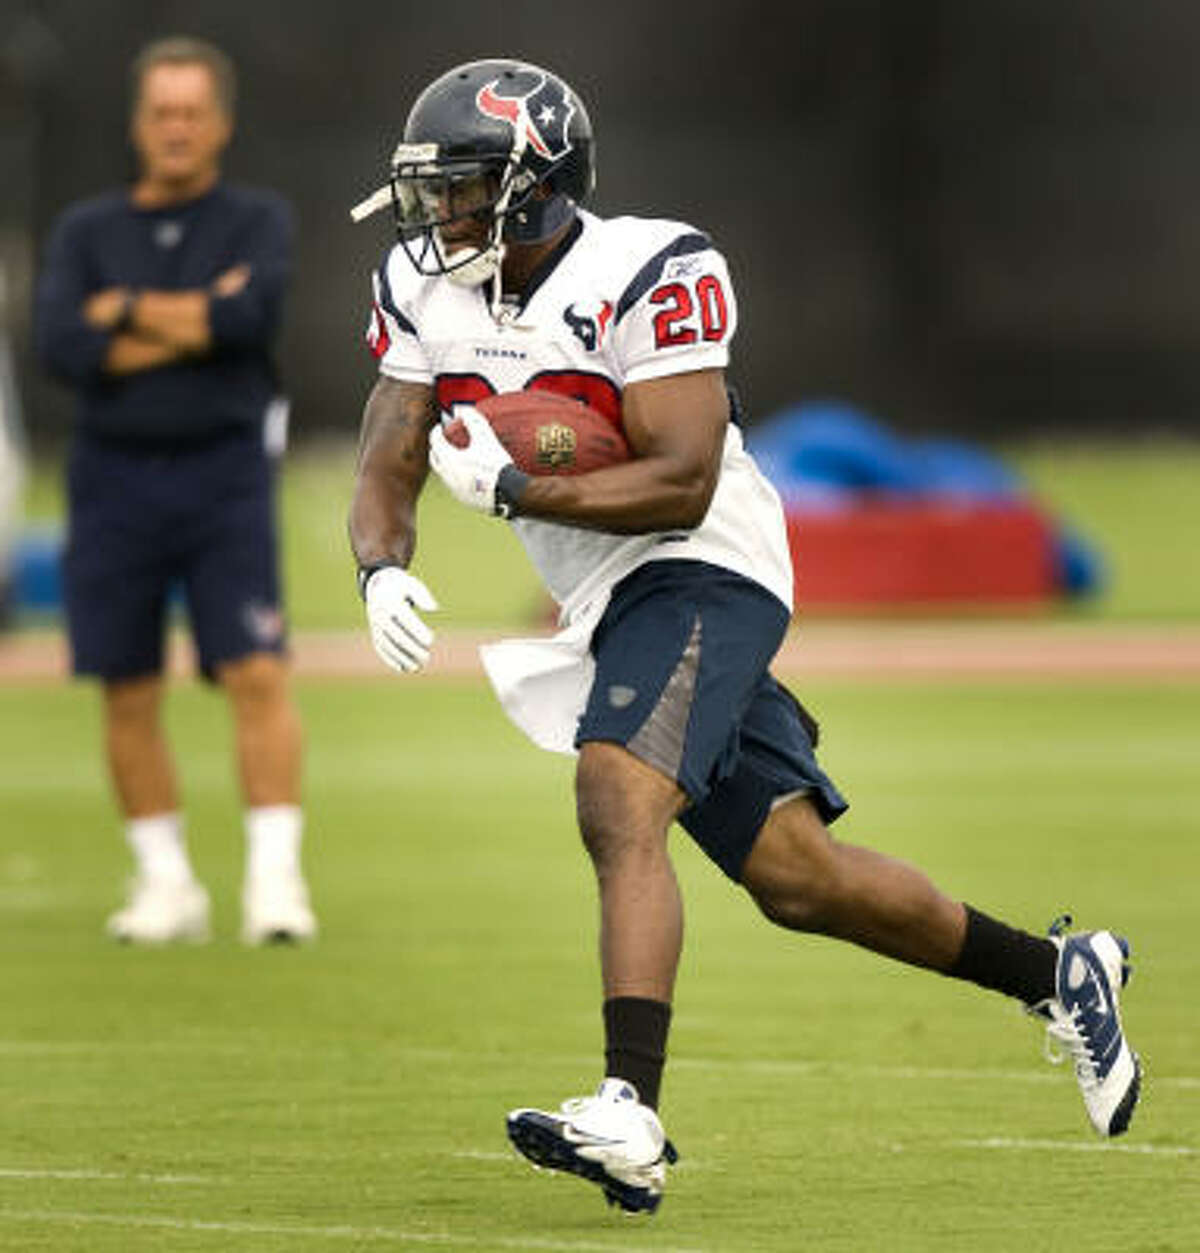 With Steve Slaton, the Texans' rank in total yards improved from 14th in the NFL to third best.